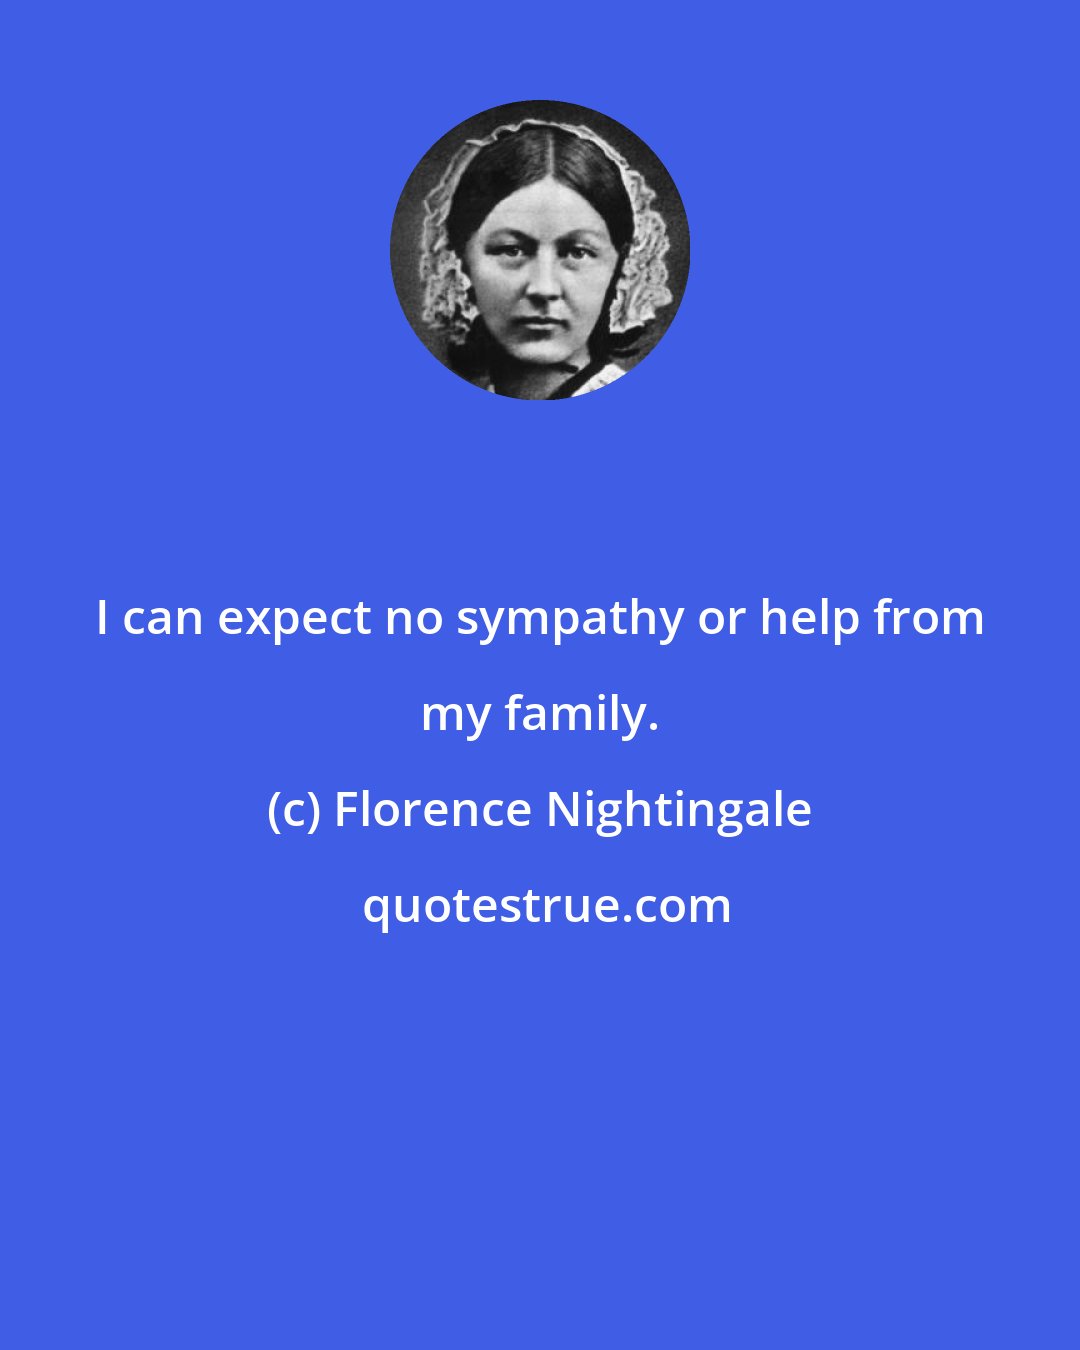 Florence Nightingale: I can expect no sympathy or help from my family.